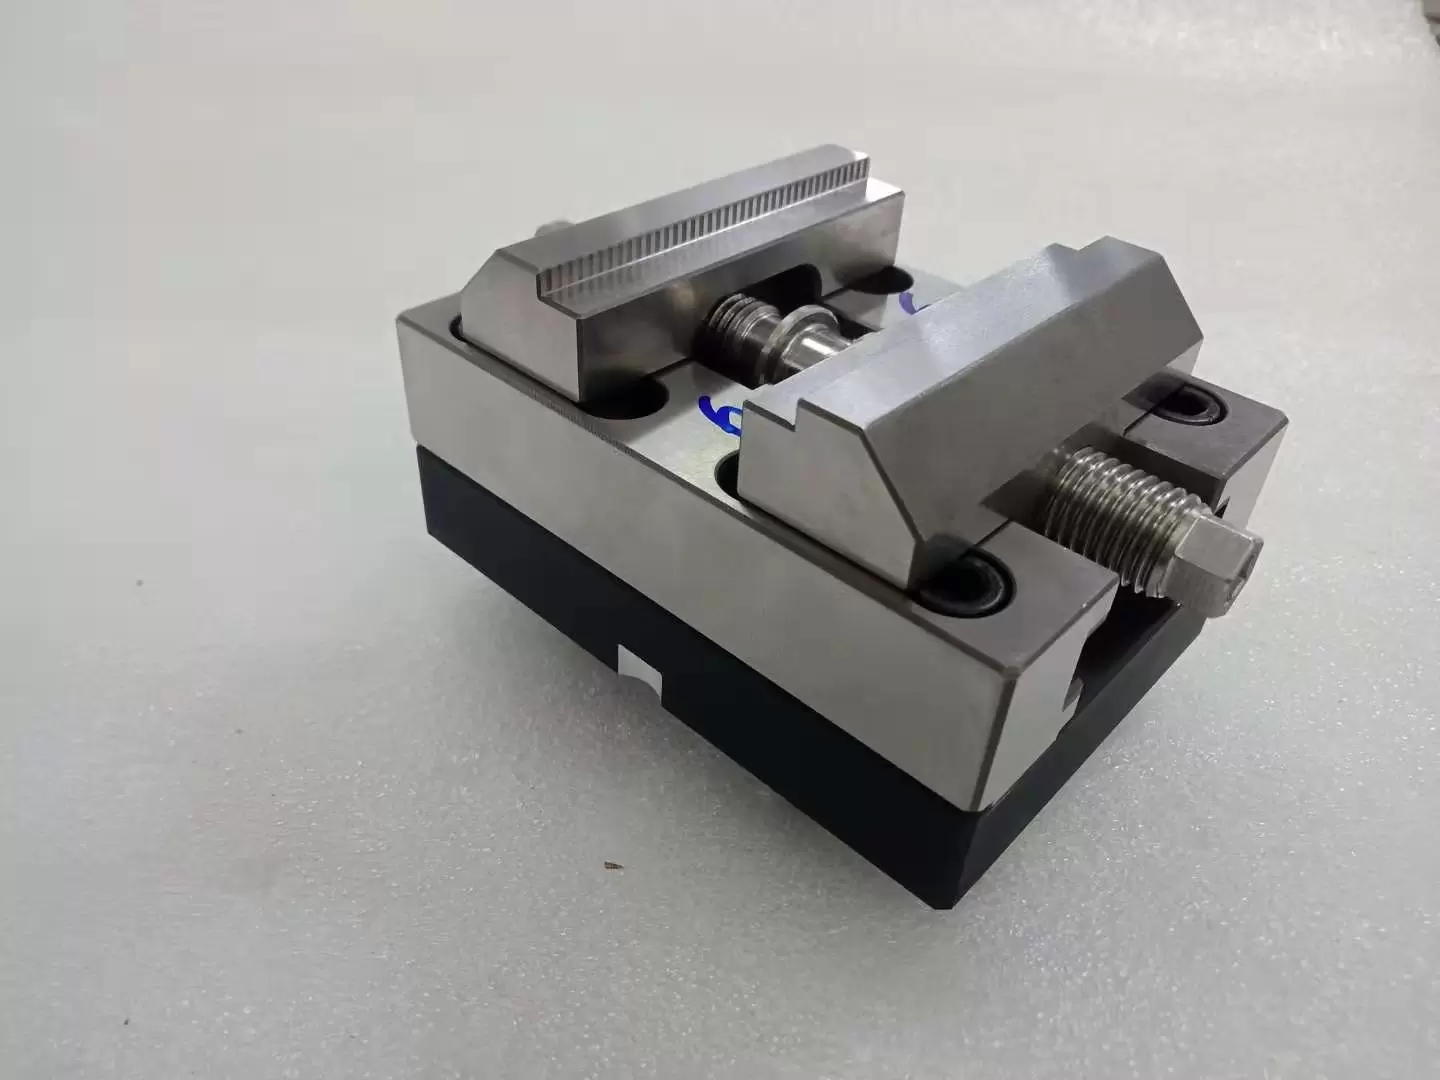 System 3R Compatible Self Centering Vice 4.725 Inch Maximum Size